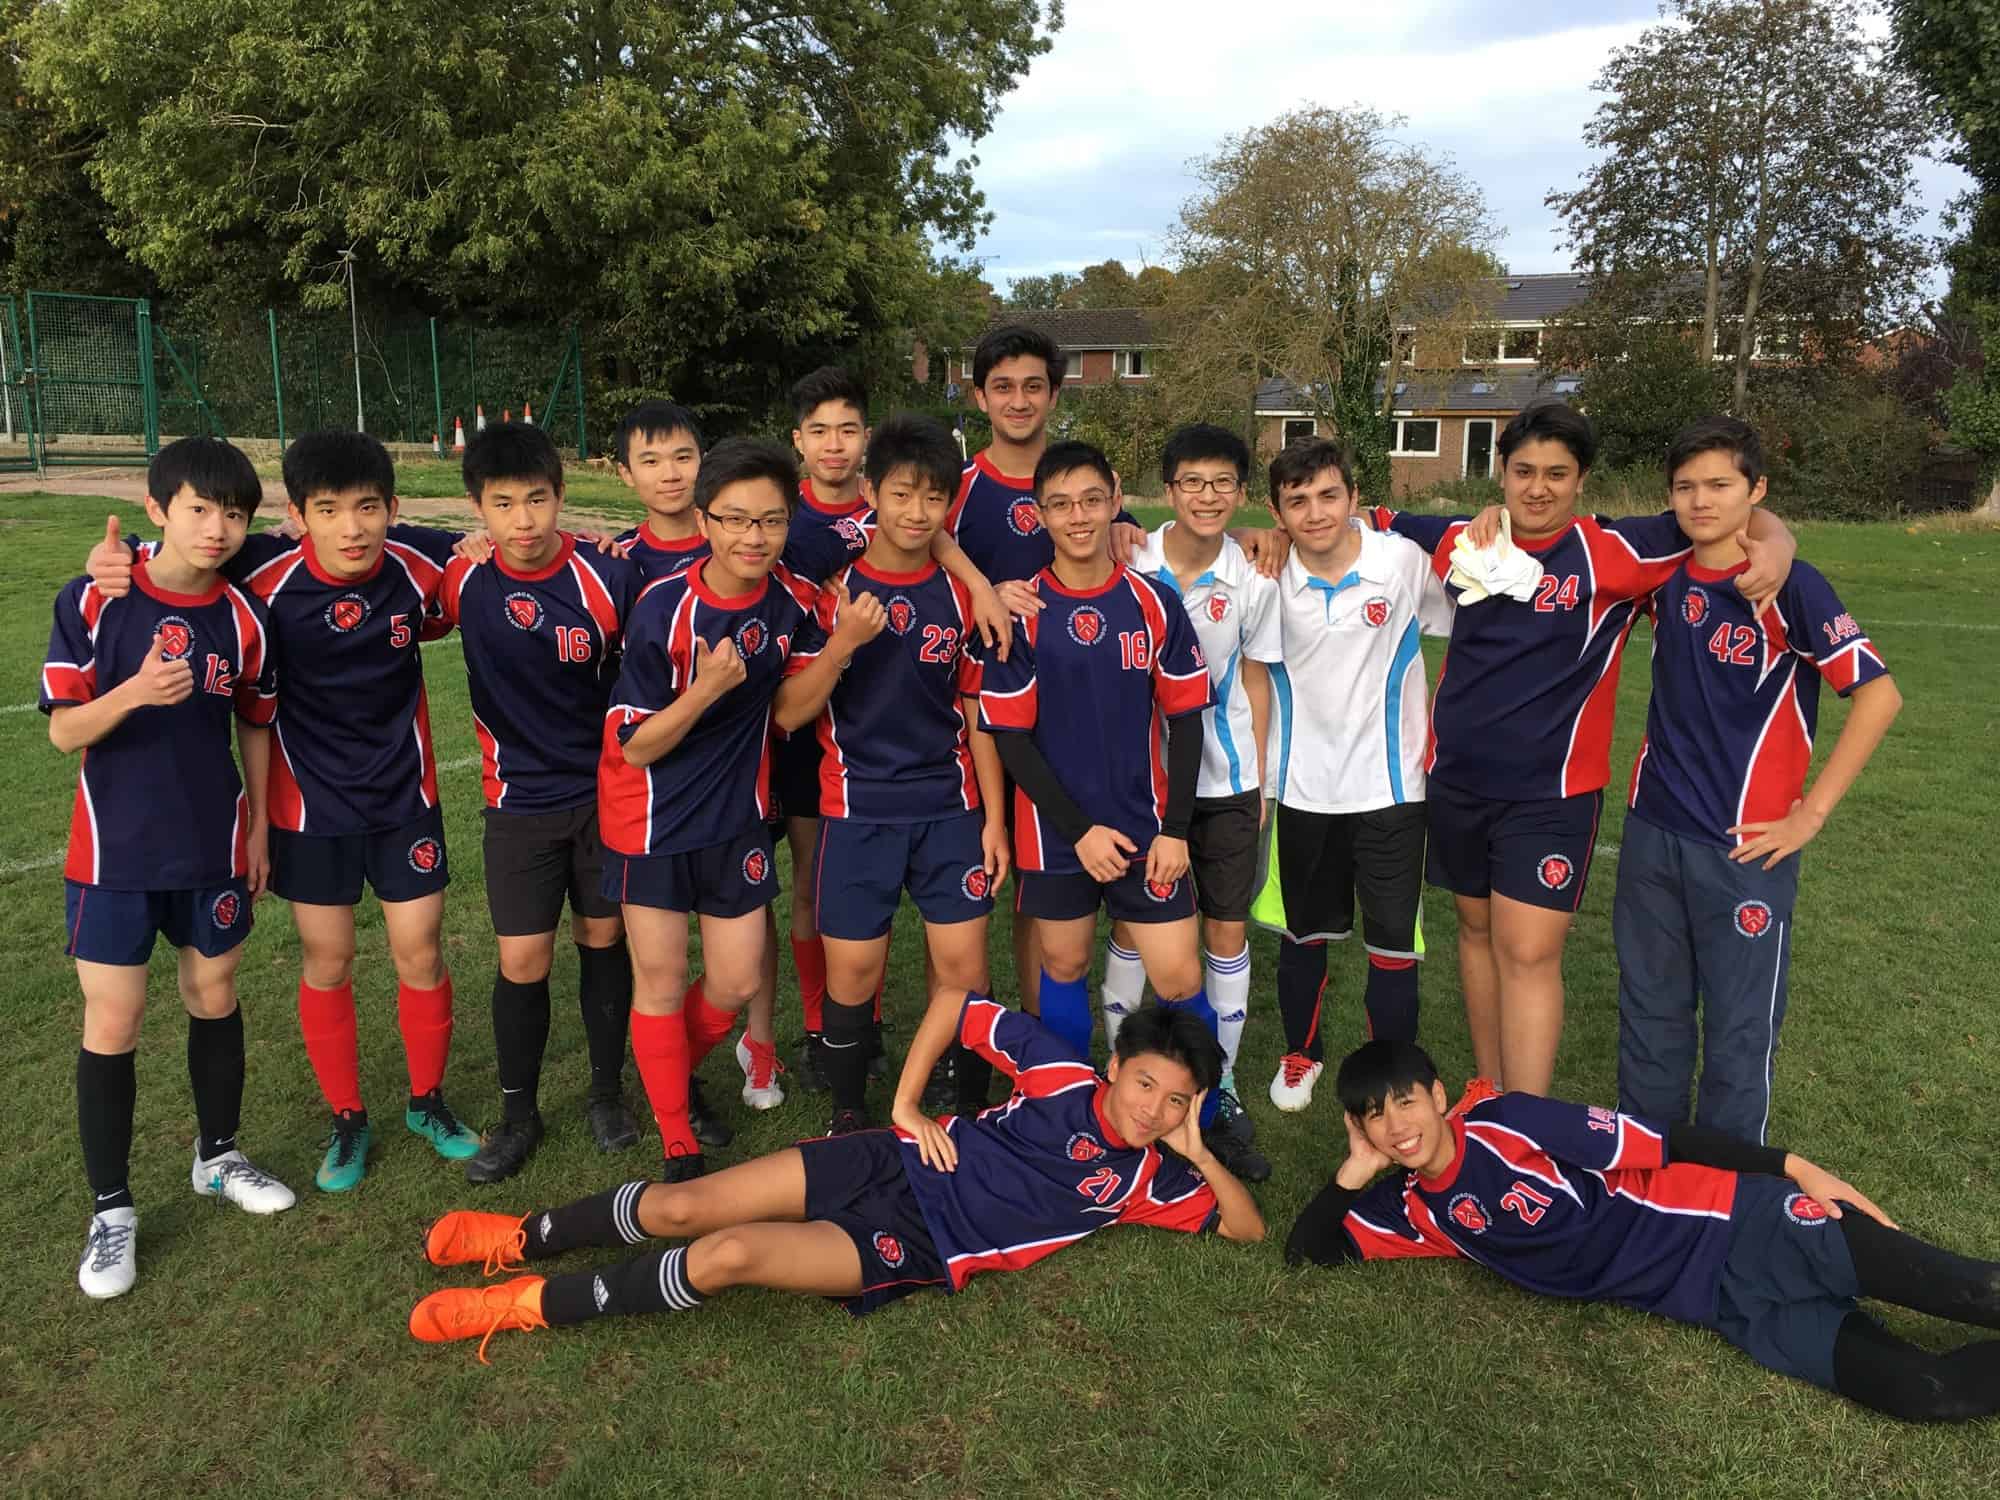 Boarders Win at Warwick featured image